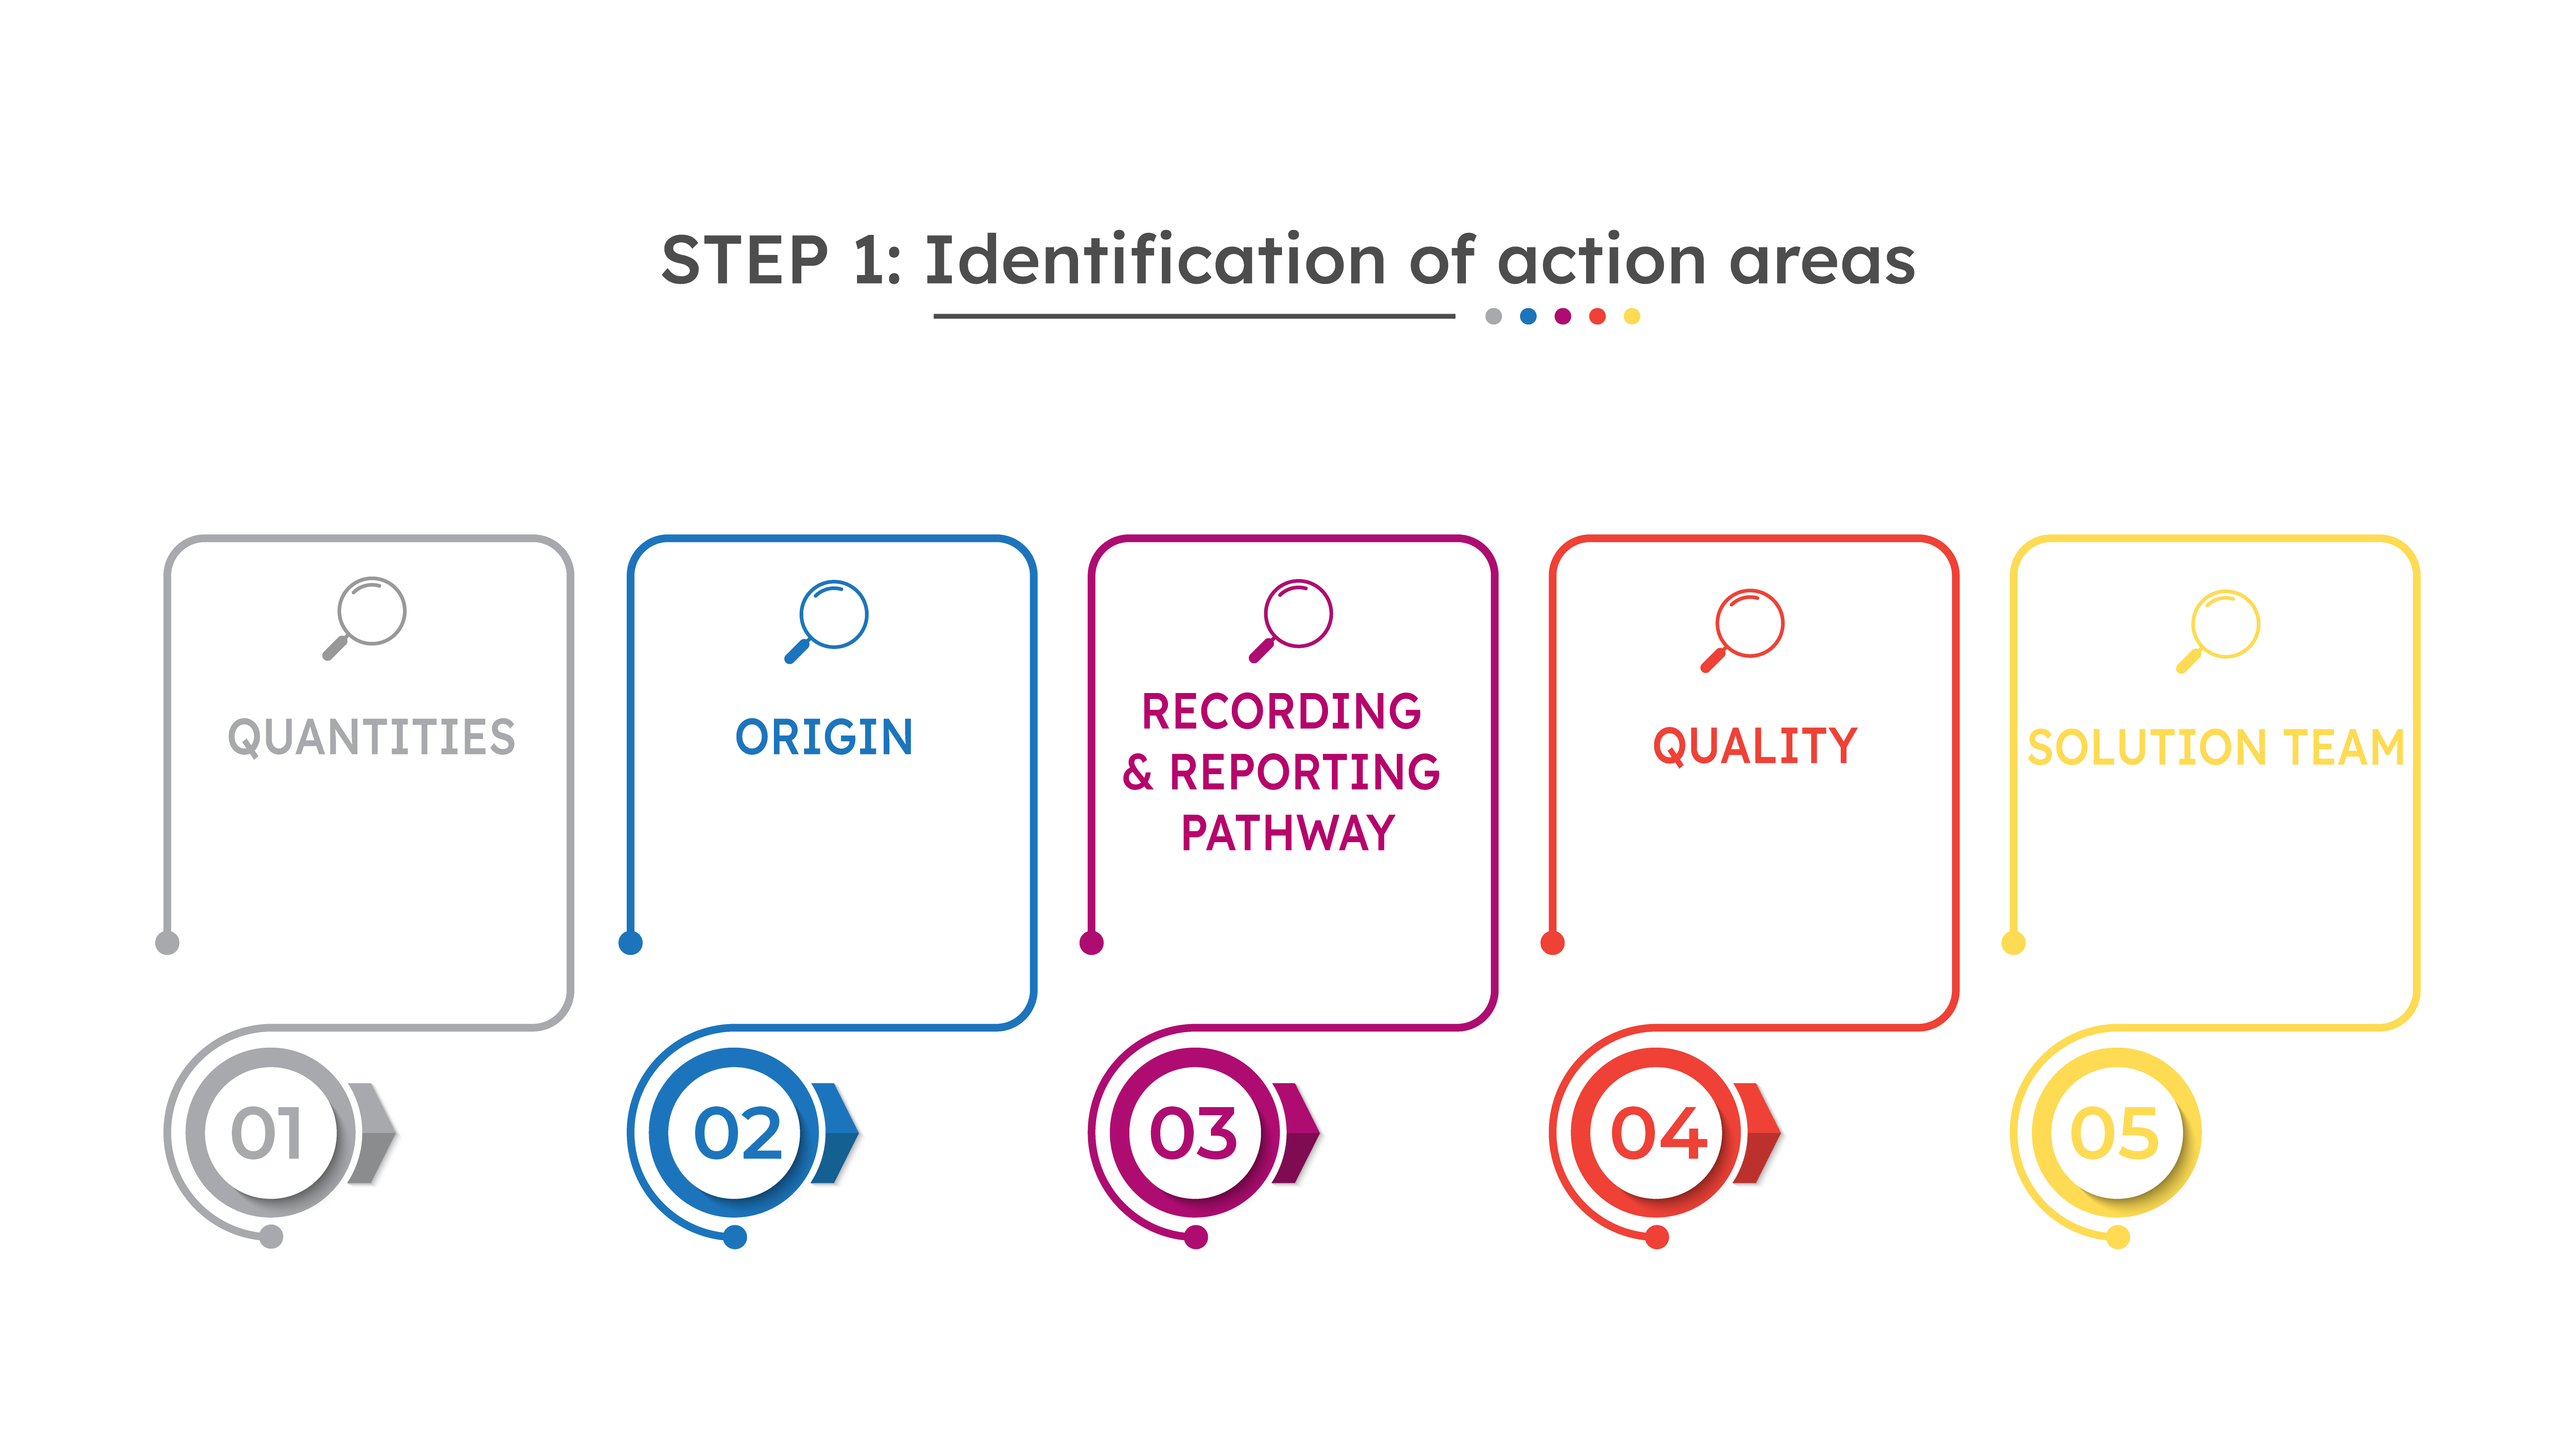  STEP 1: IDENTIFY AREAS OF ACTION